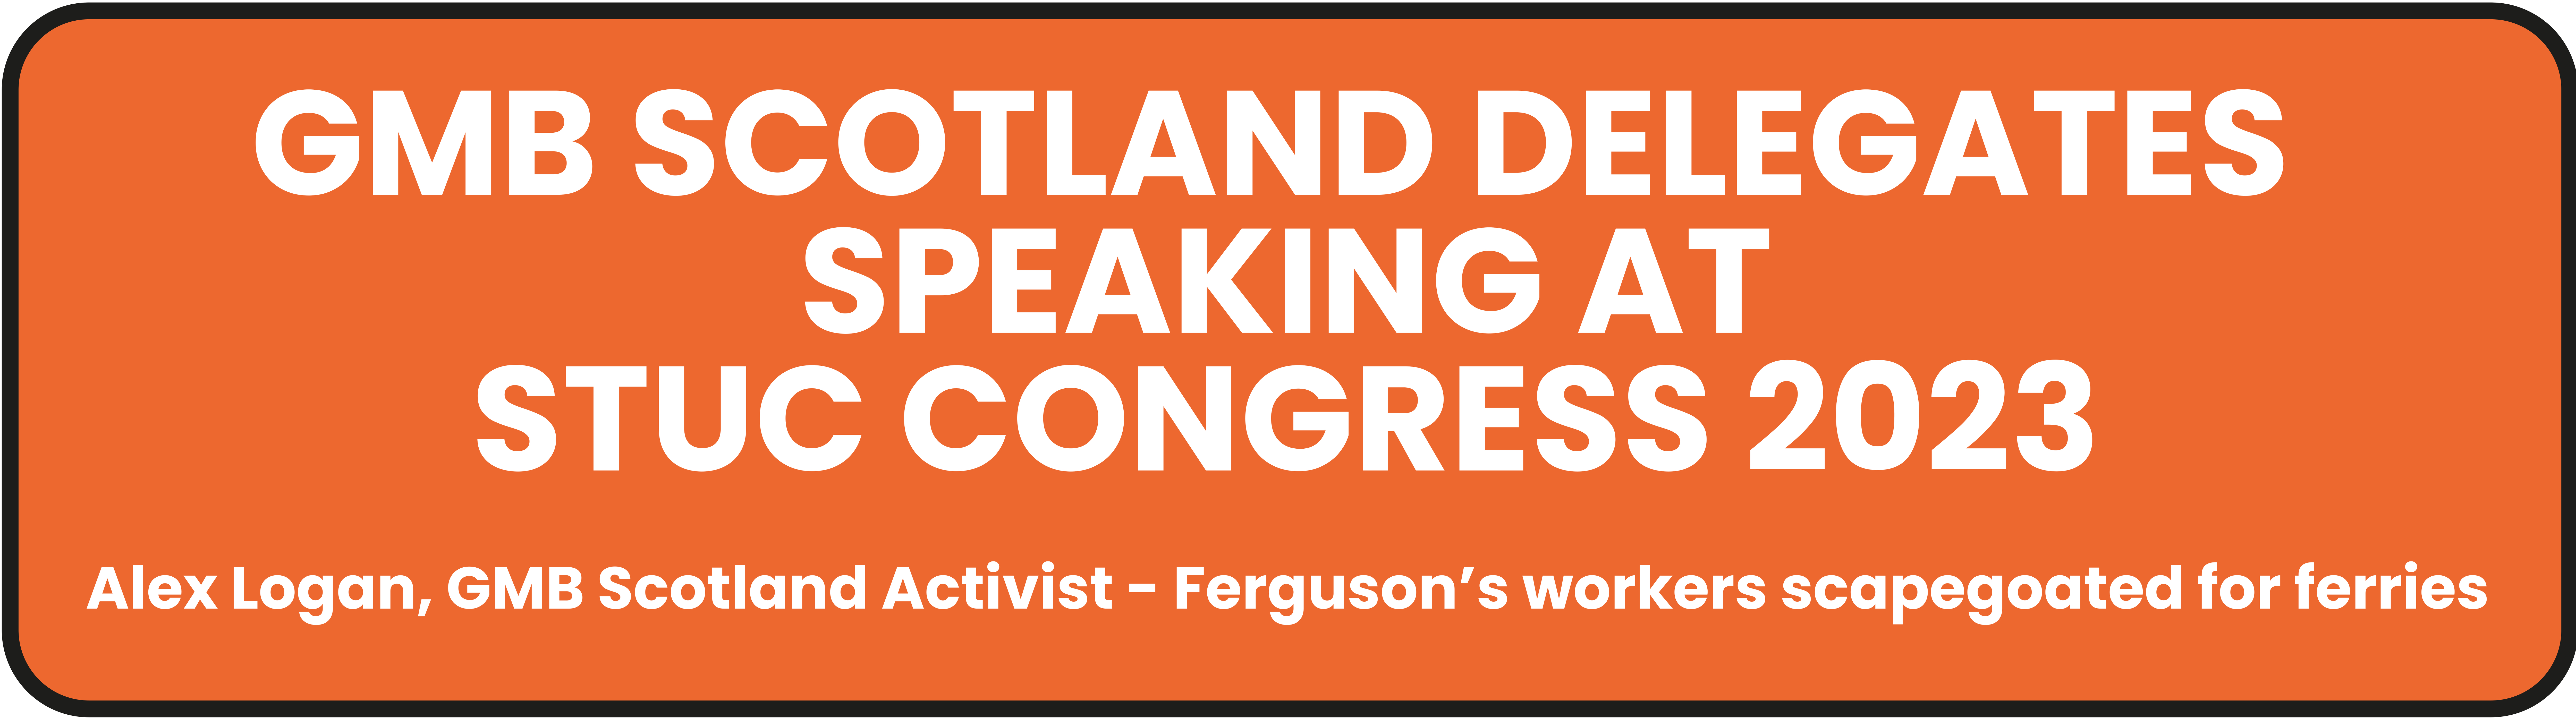 GMB Scotland at STUC: Ferguson’s workers scapegoated for ferries